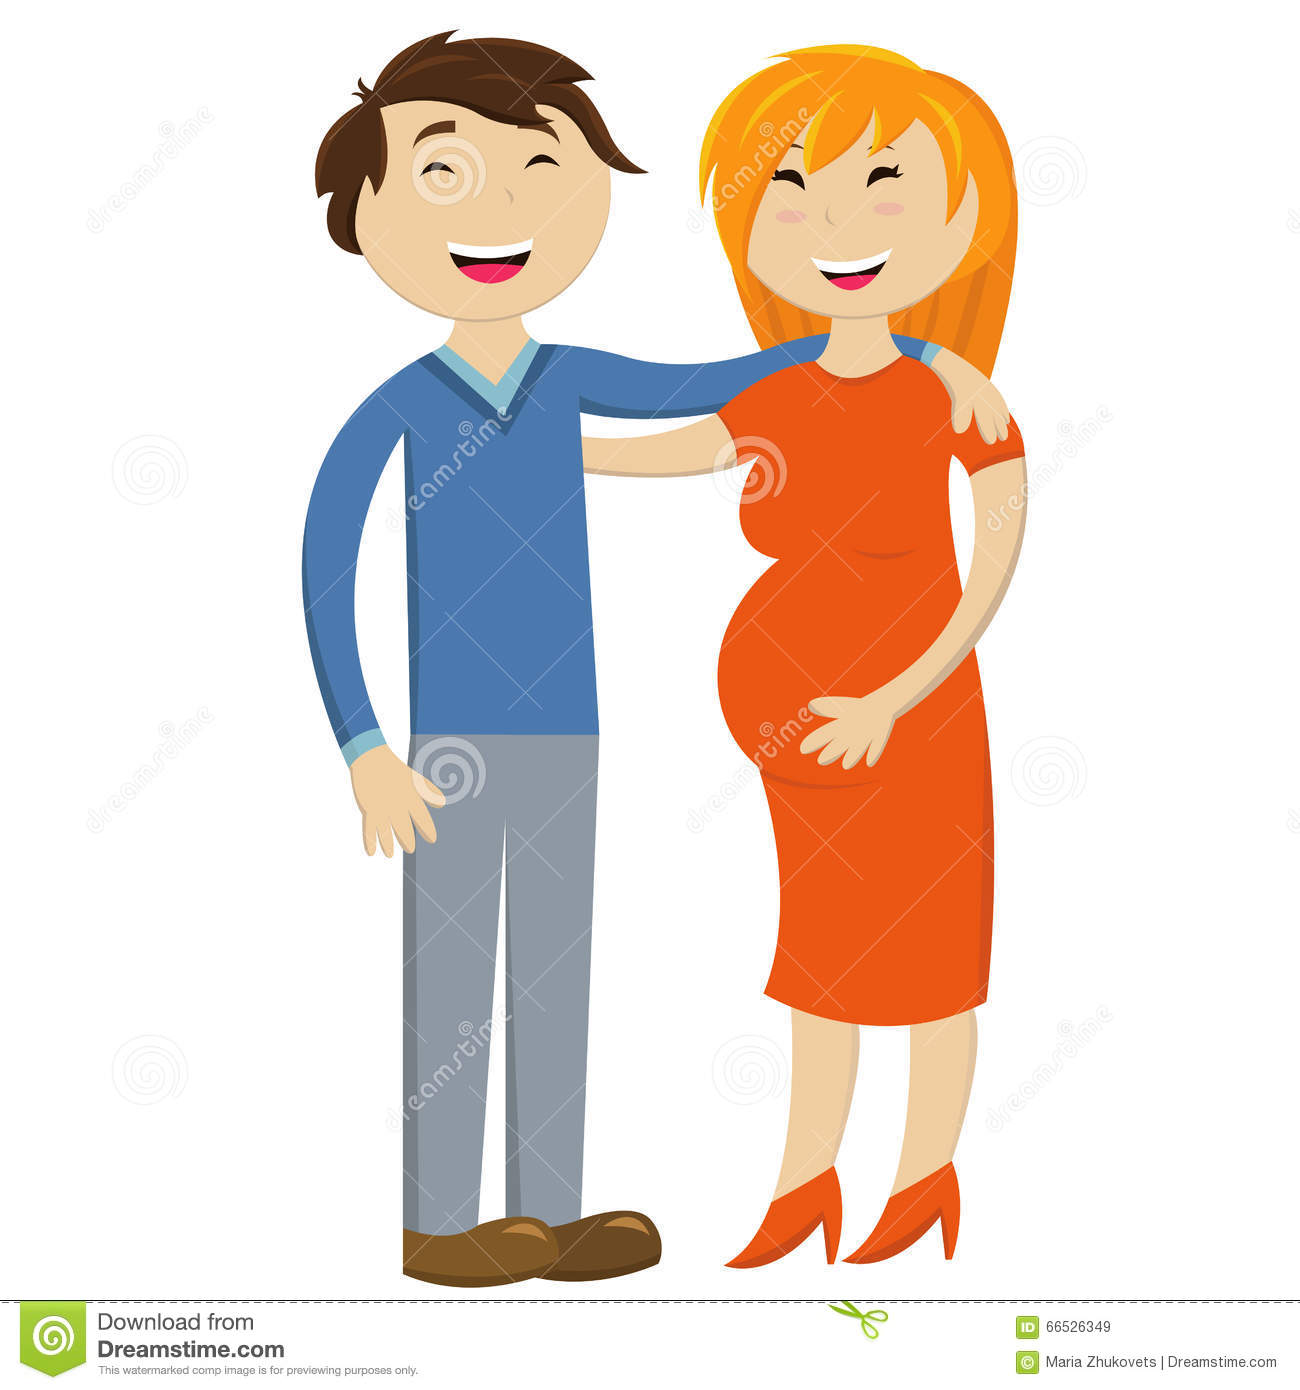 Husband and wife clipart 7 » Clipart Station.